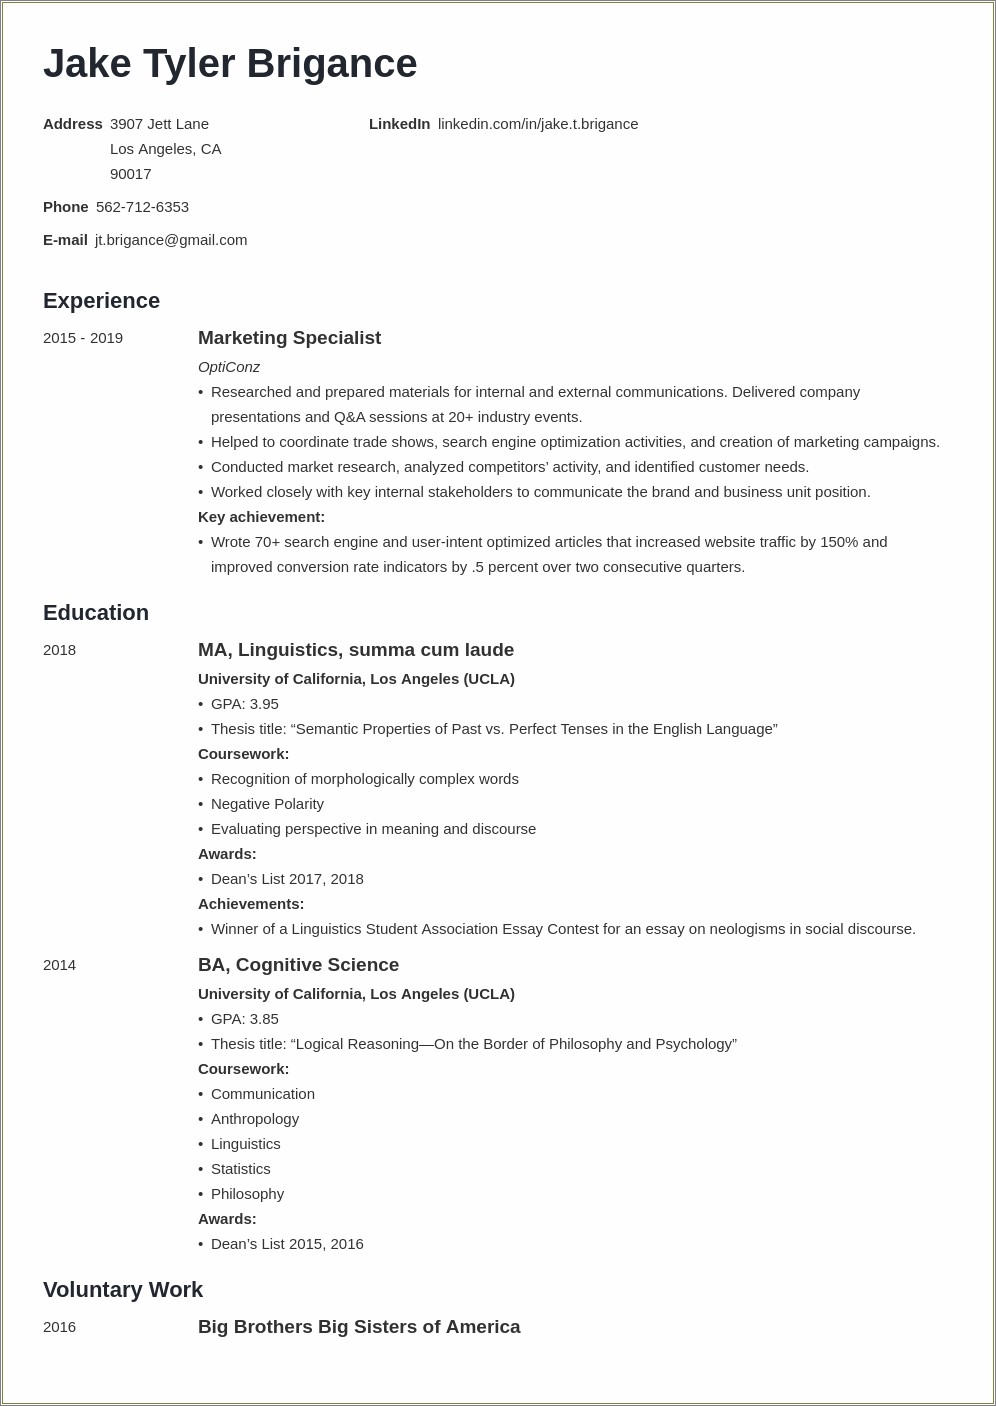 Sample Resume For College Undergrauate To Persue Law